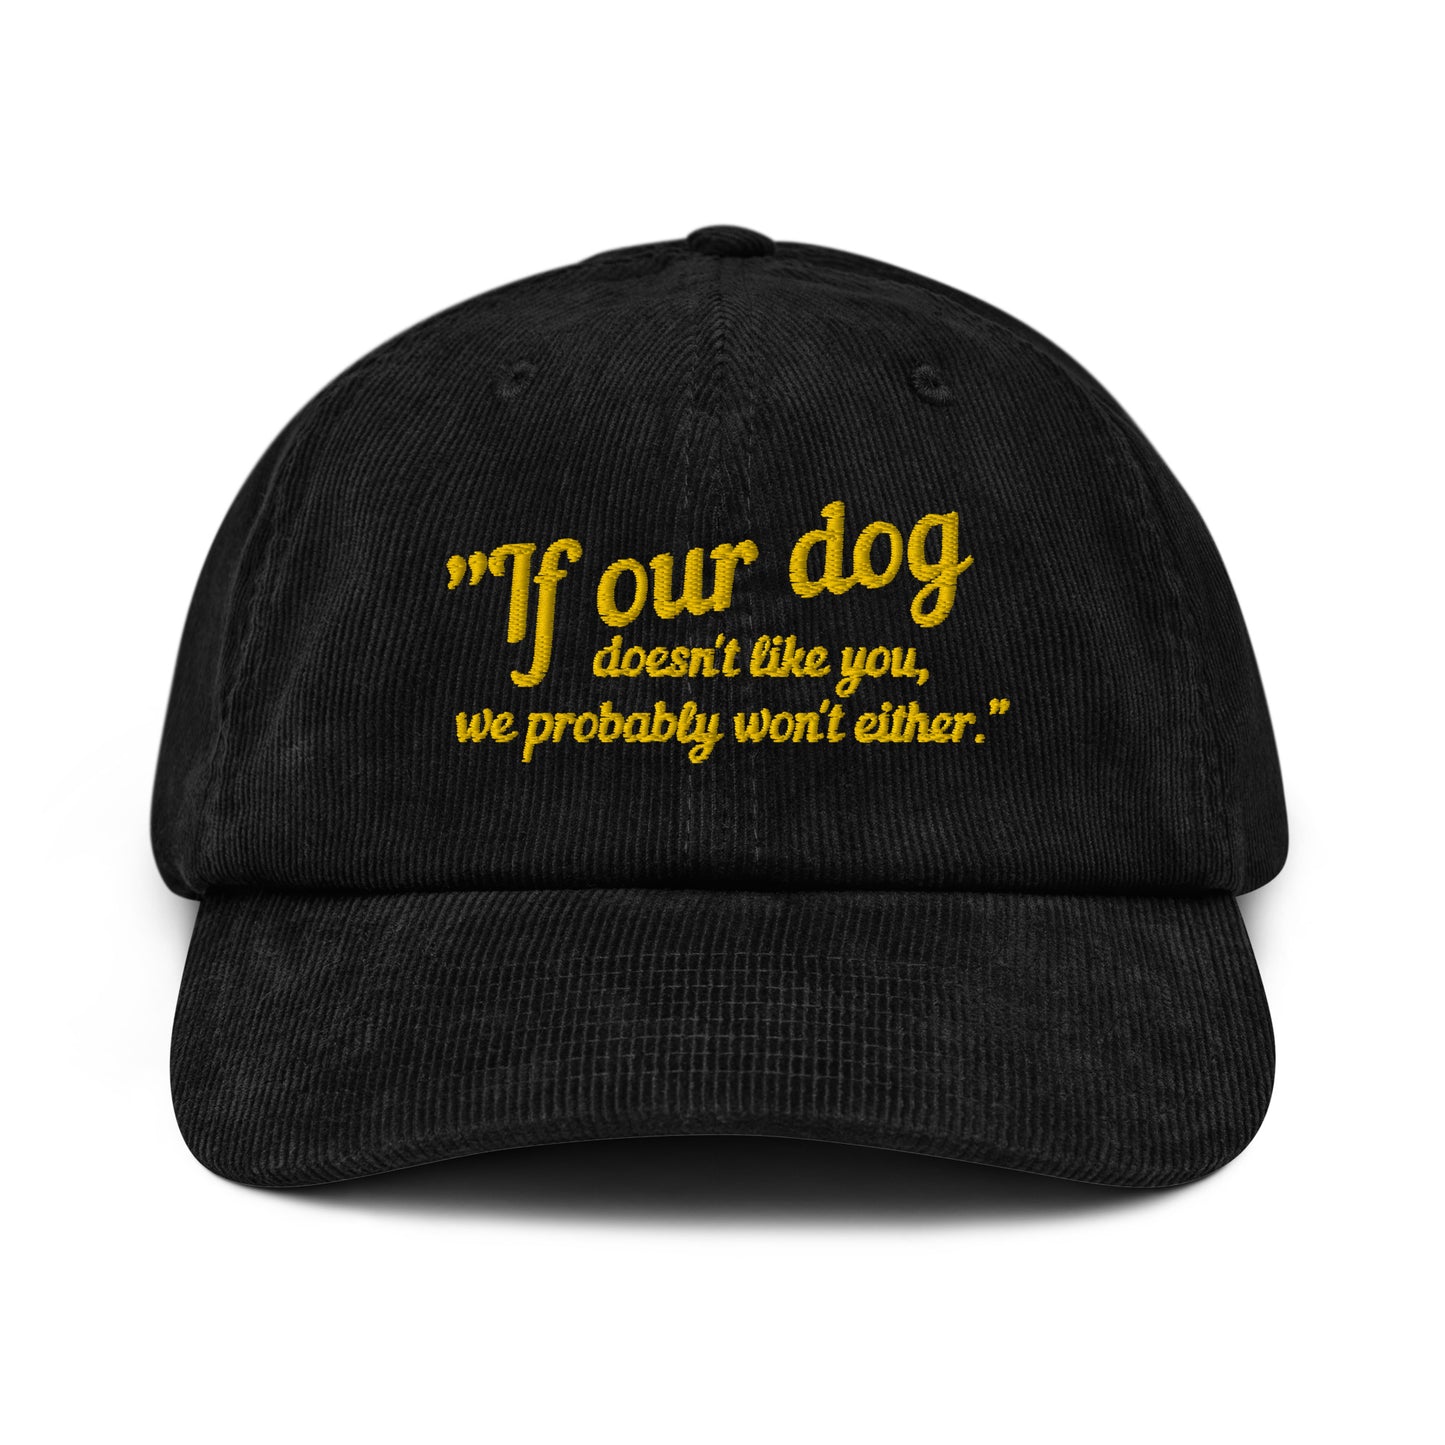 If Our Dog Doesn't Like You Corduroy hat